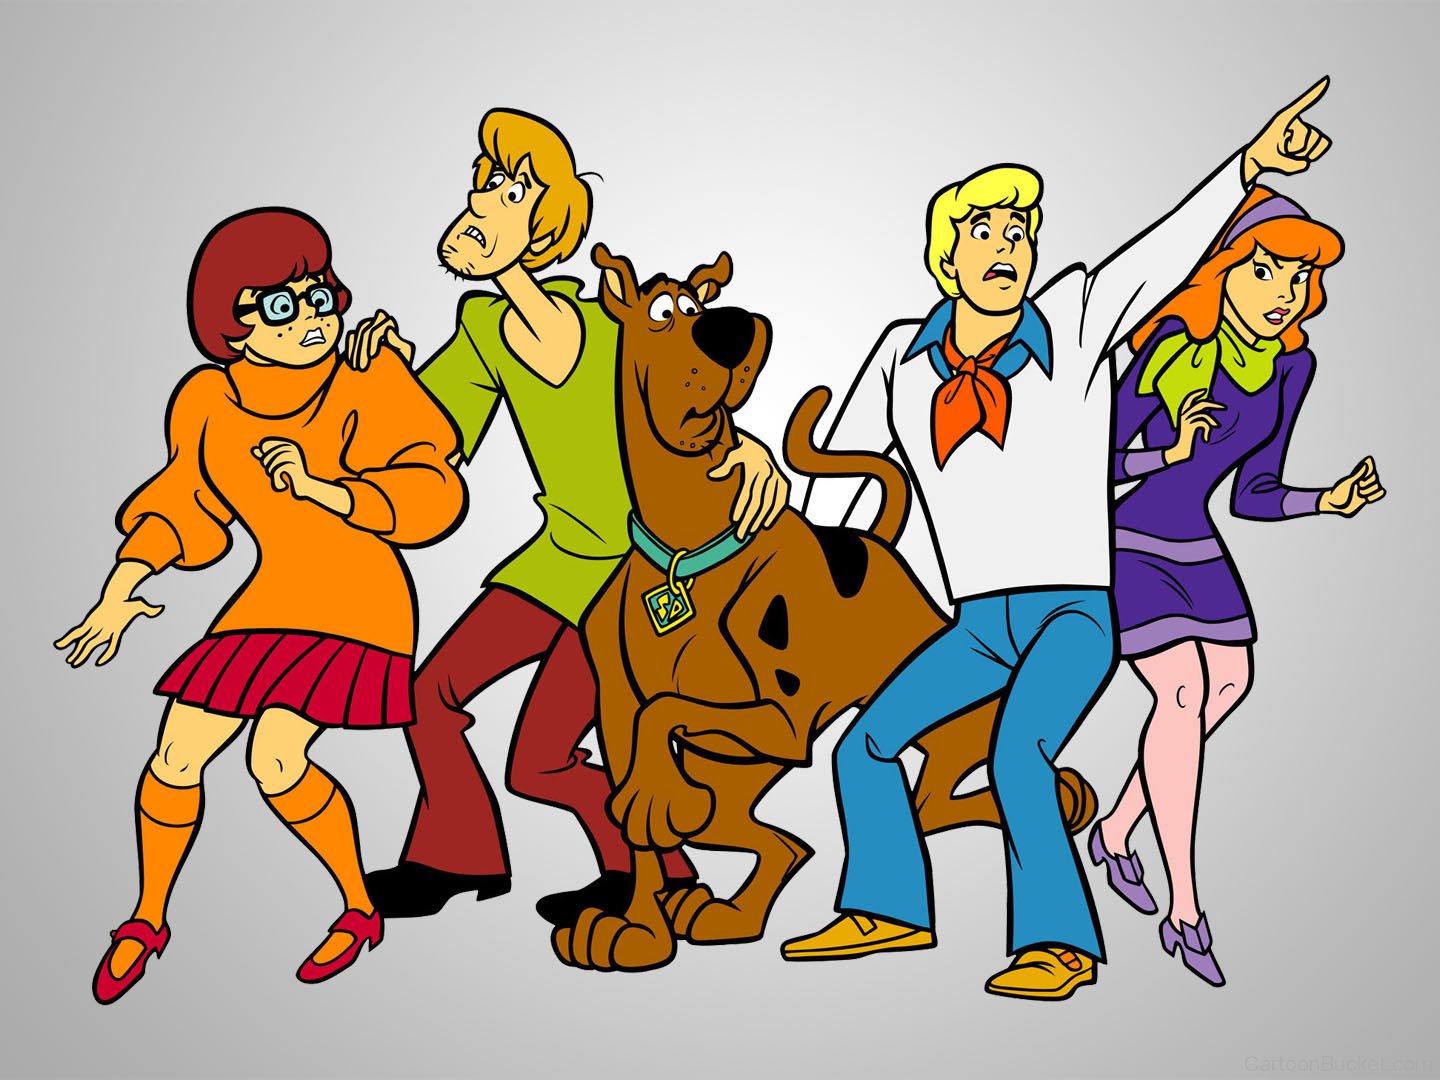 Picture Of Scooby Doo With Family.